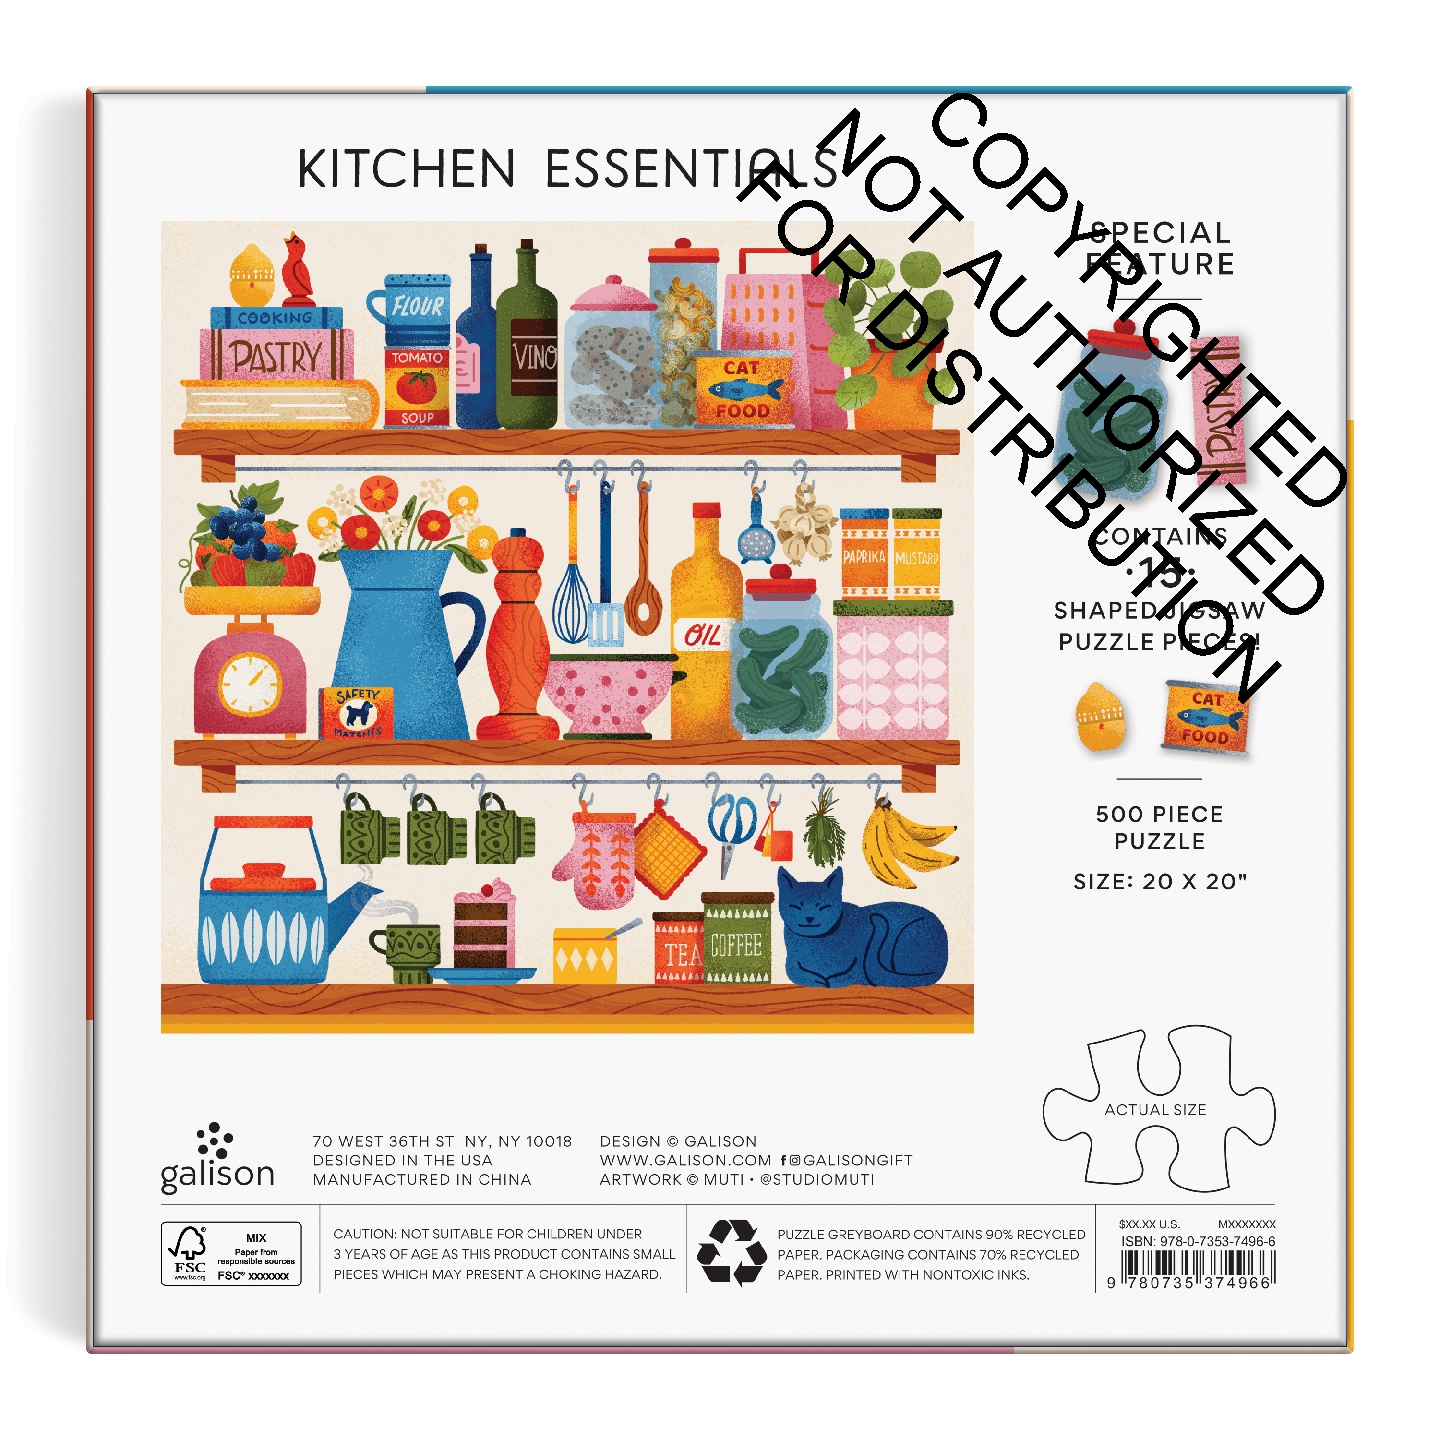 Kitchen Essentials 500 Piece Puzzle with Shaped Pieces